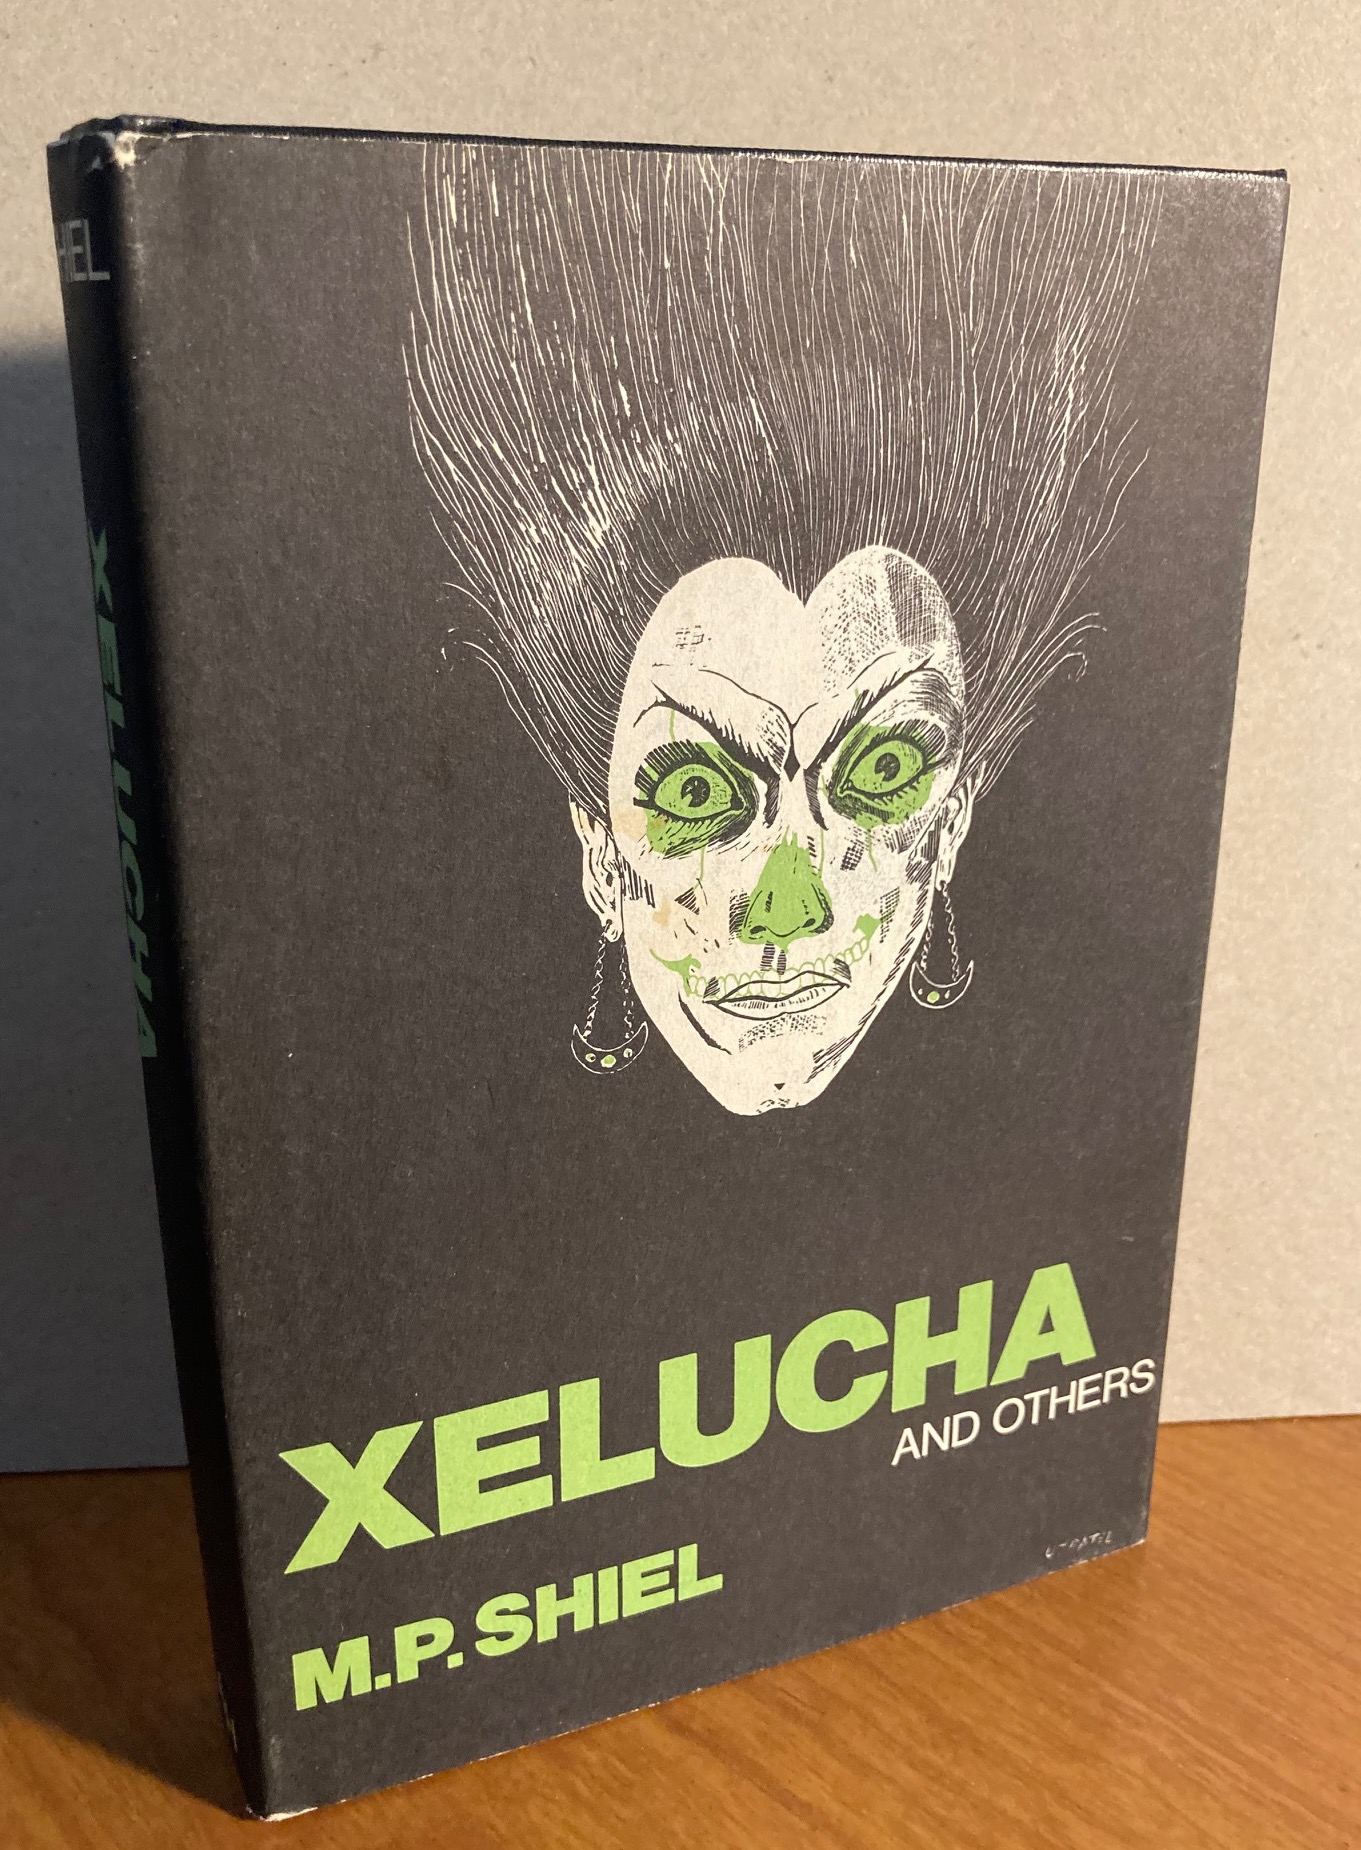 Xelucha and Others. - Shiel, M.P.